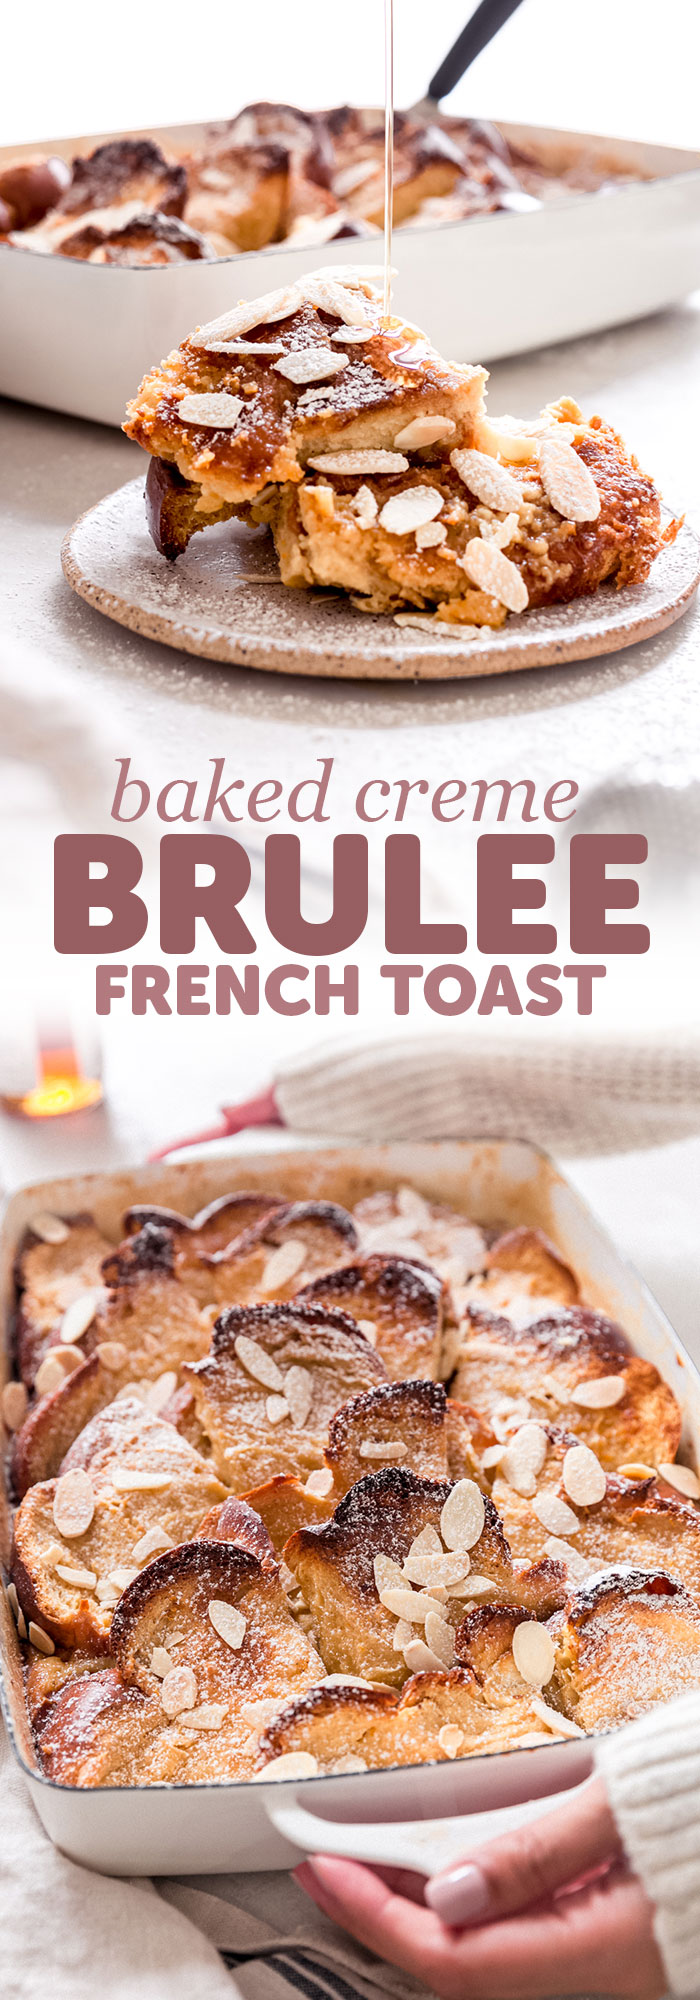 Baked Creme Brulee French Toast - The easiest baked creme brulee french toast recipe, and it feeds a crowd! The bottom is loaded with a caramel glaze, and the custard is rich and creamy! The best part is, you can make it ahead #cremebrulee #frenchtoast #bakedfrenchtoast #cremebruleefrenchtoast #frenchtoastcasserole | Littlespicejar.com